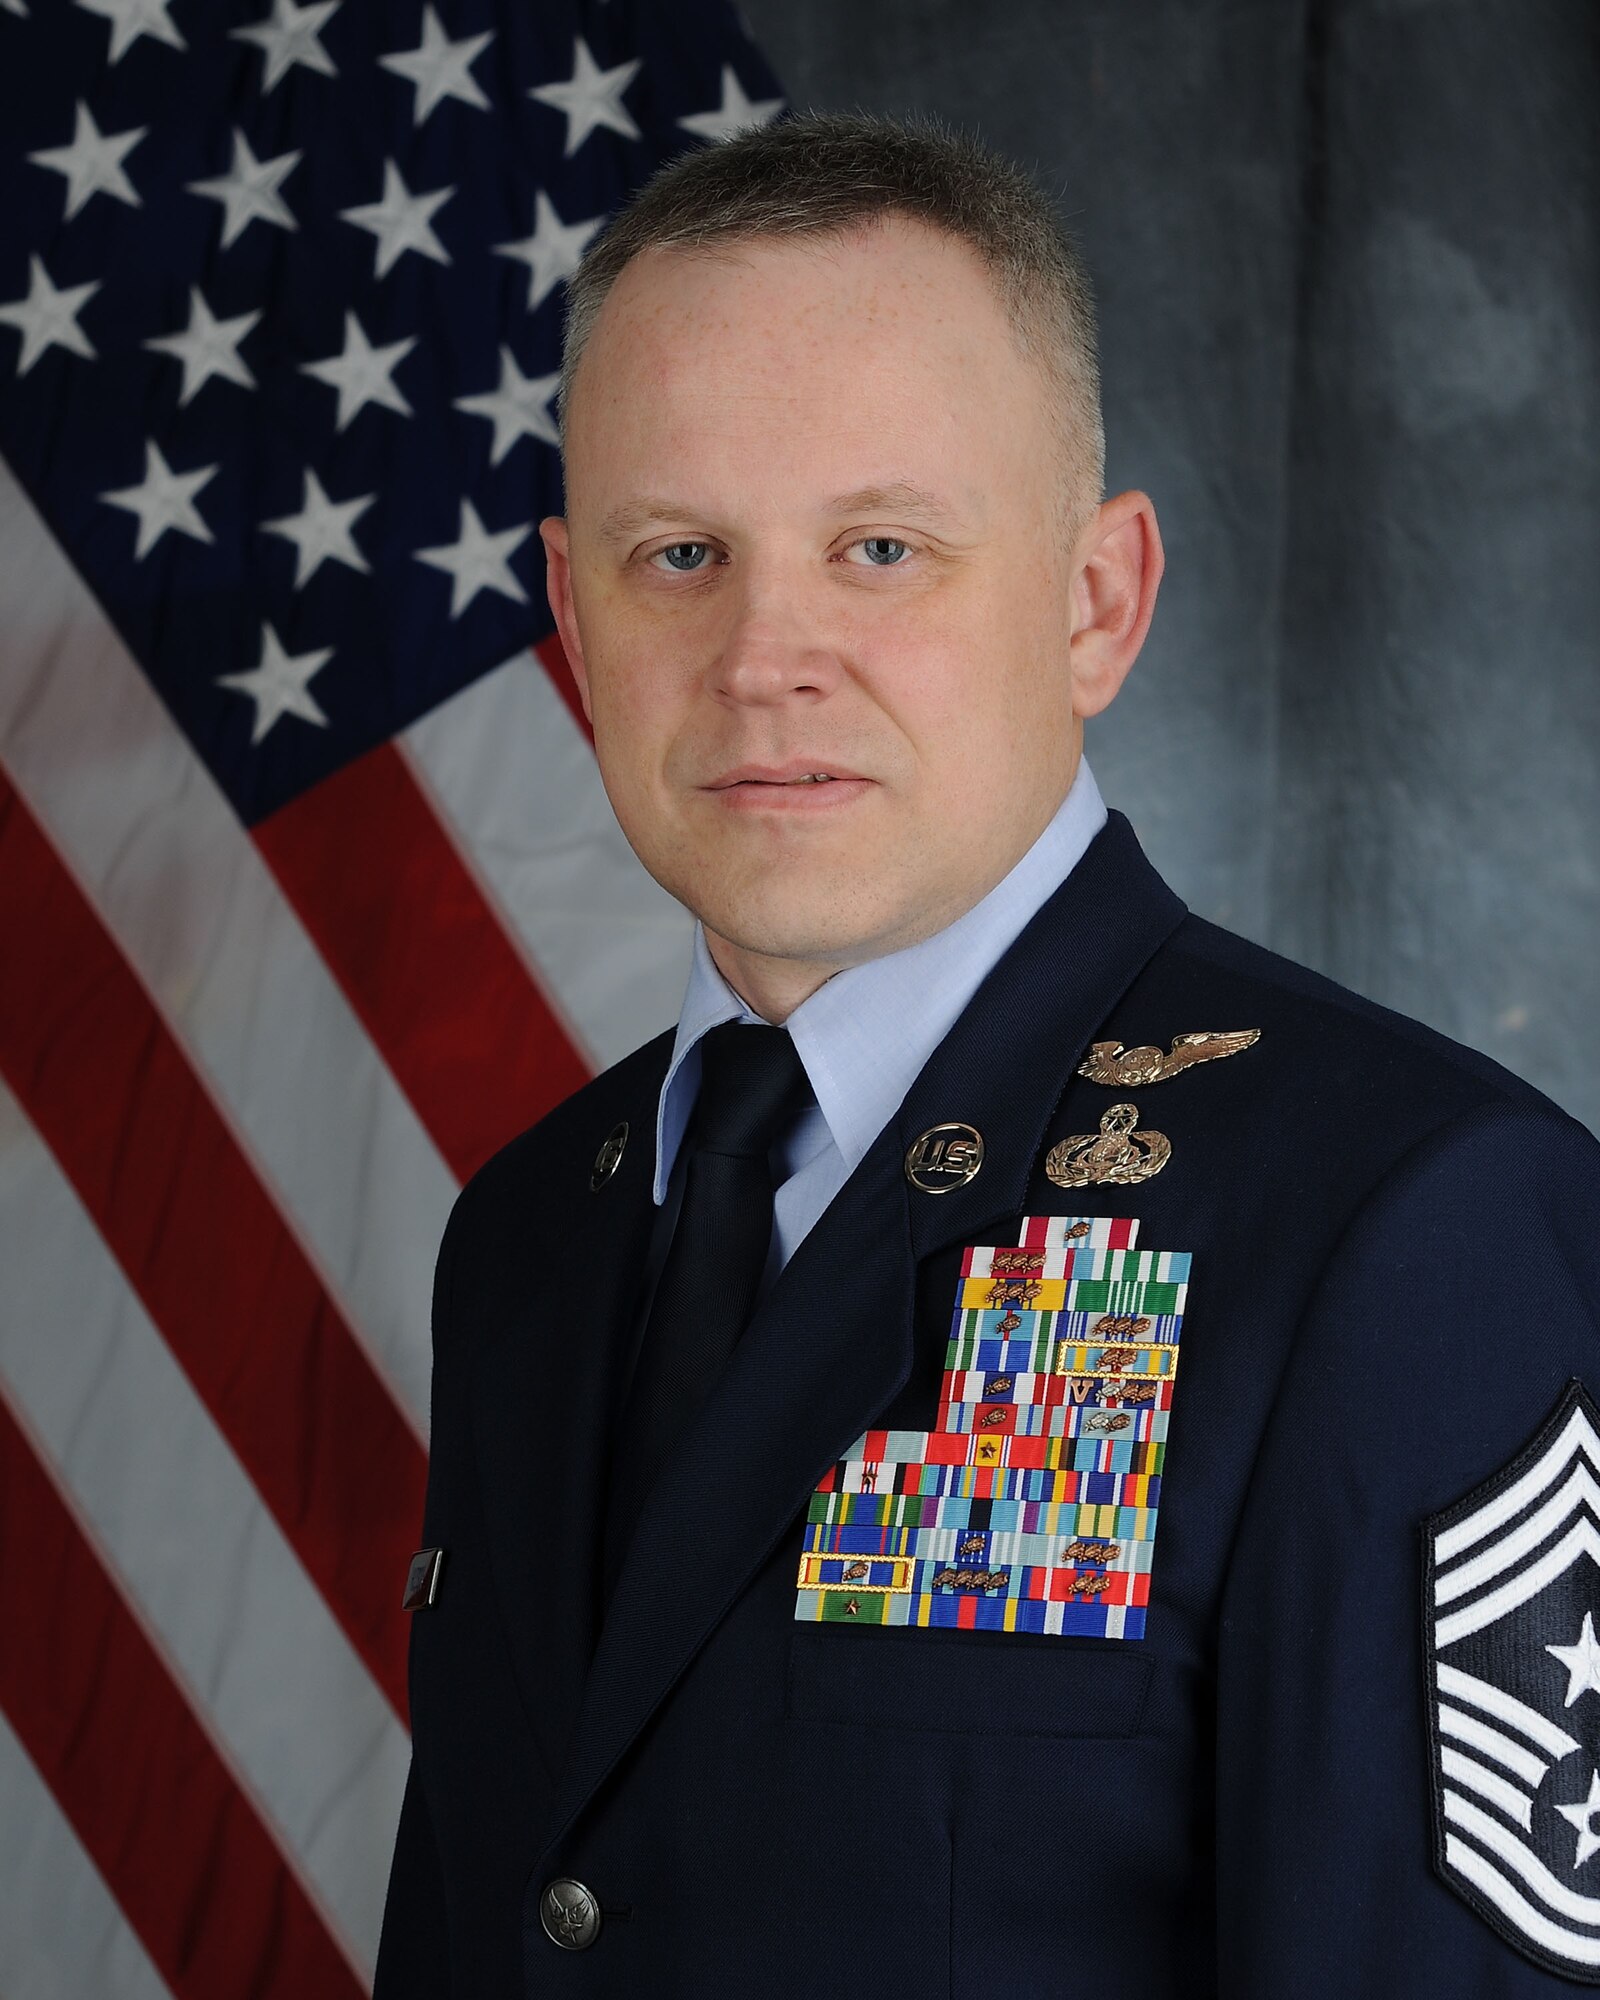 Commentary by Chief Master Sgt. Philip Hudson, 621st Contingency Response Wing